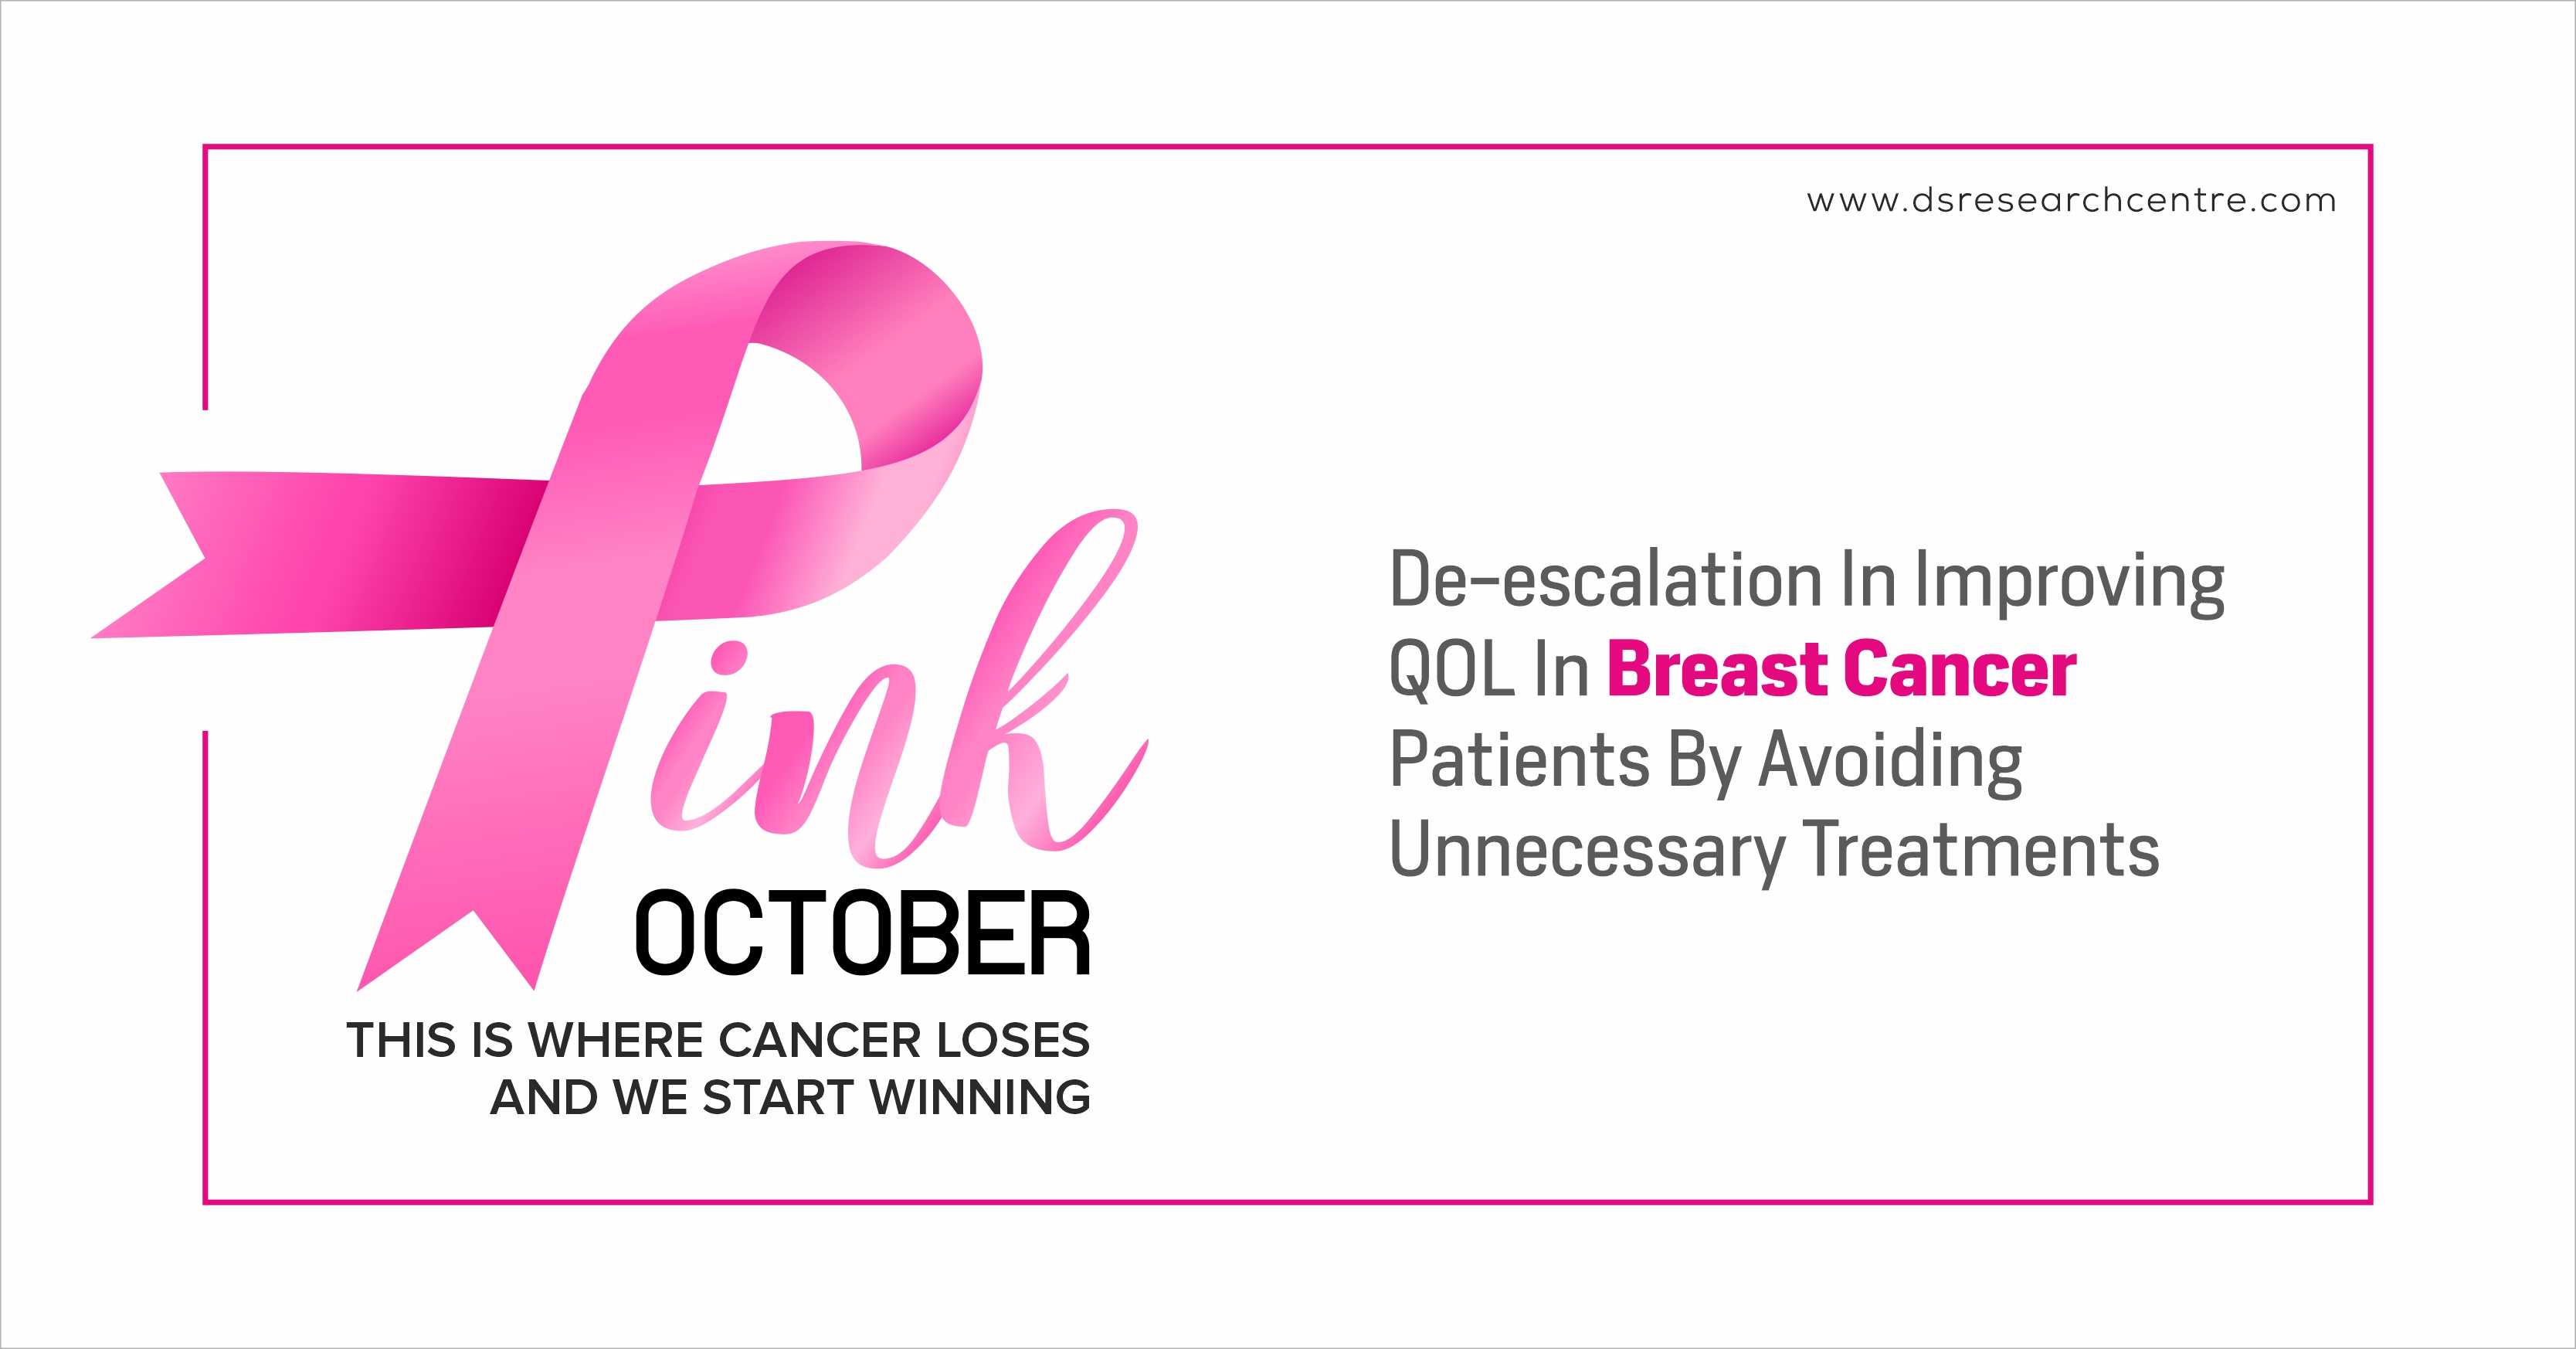 De-escalation  to improve breast cancer patients’ quality of life by avoiding unnecessary over-treatment